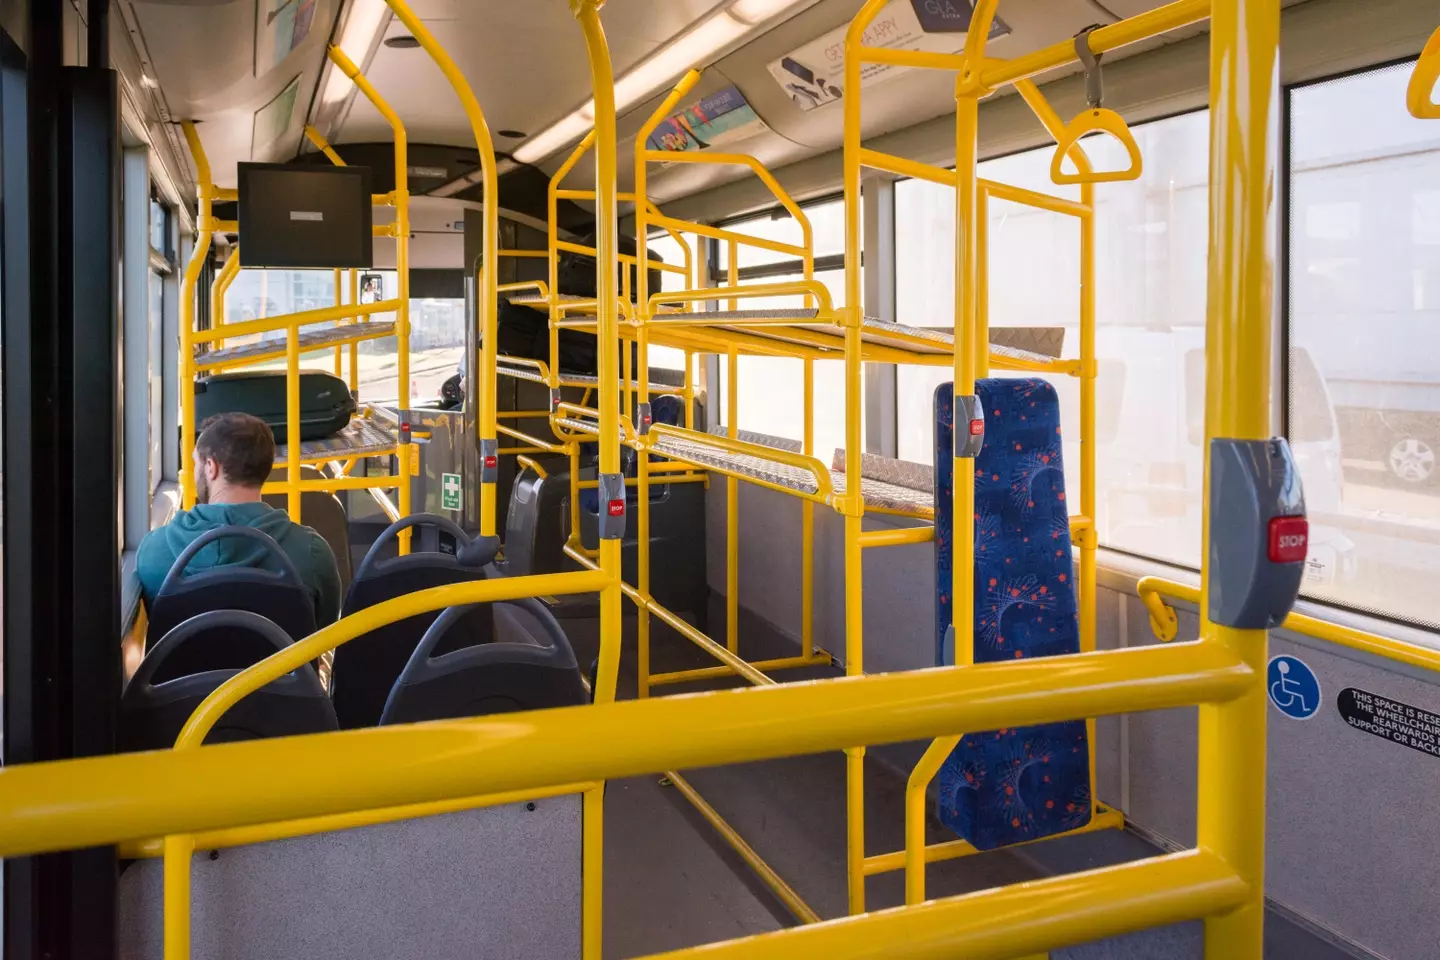 A woman was grabbed and kicked out of her seat on an otherwise empty bus.